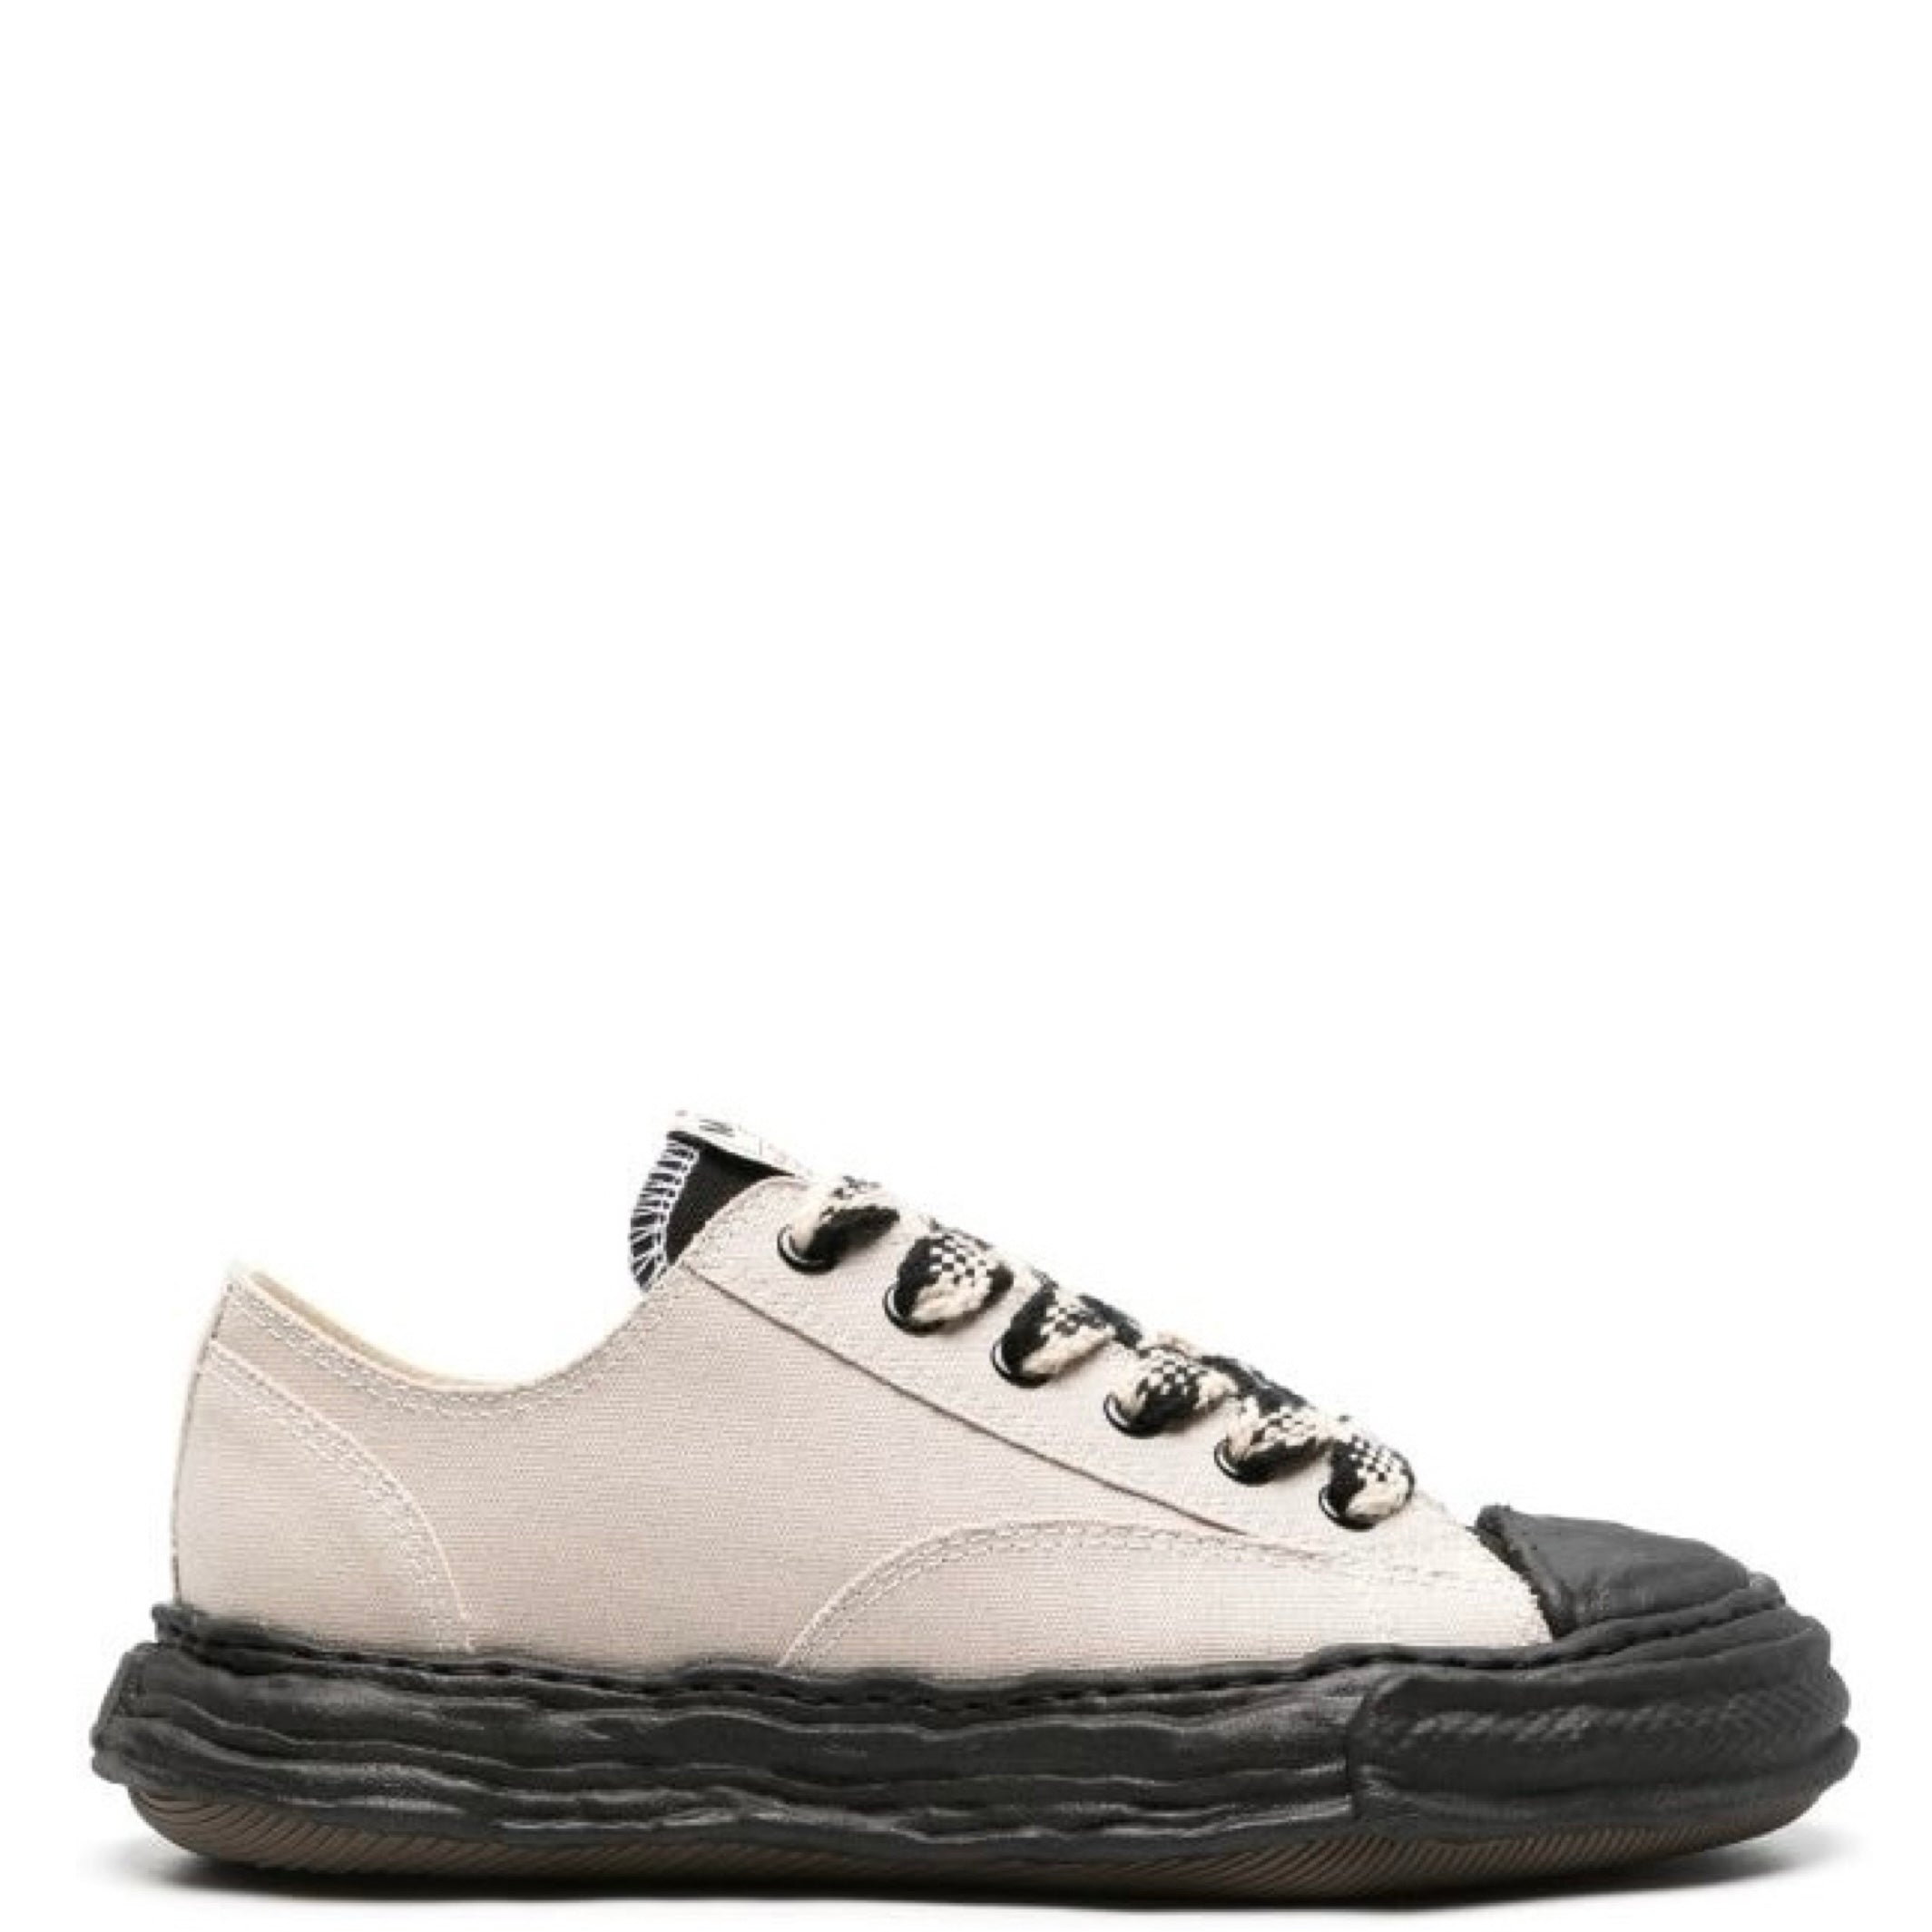 Mihara Yasuhiro Peterson23 LOW OG SOLE CANVAS WHITE/BLACK SNEAKERS WHITE/BLACK LACES